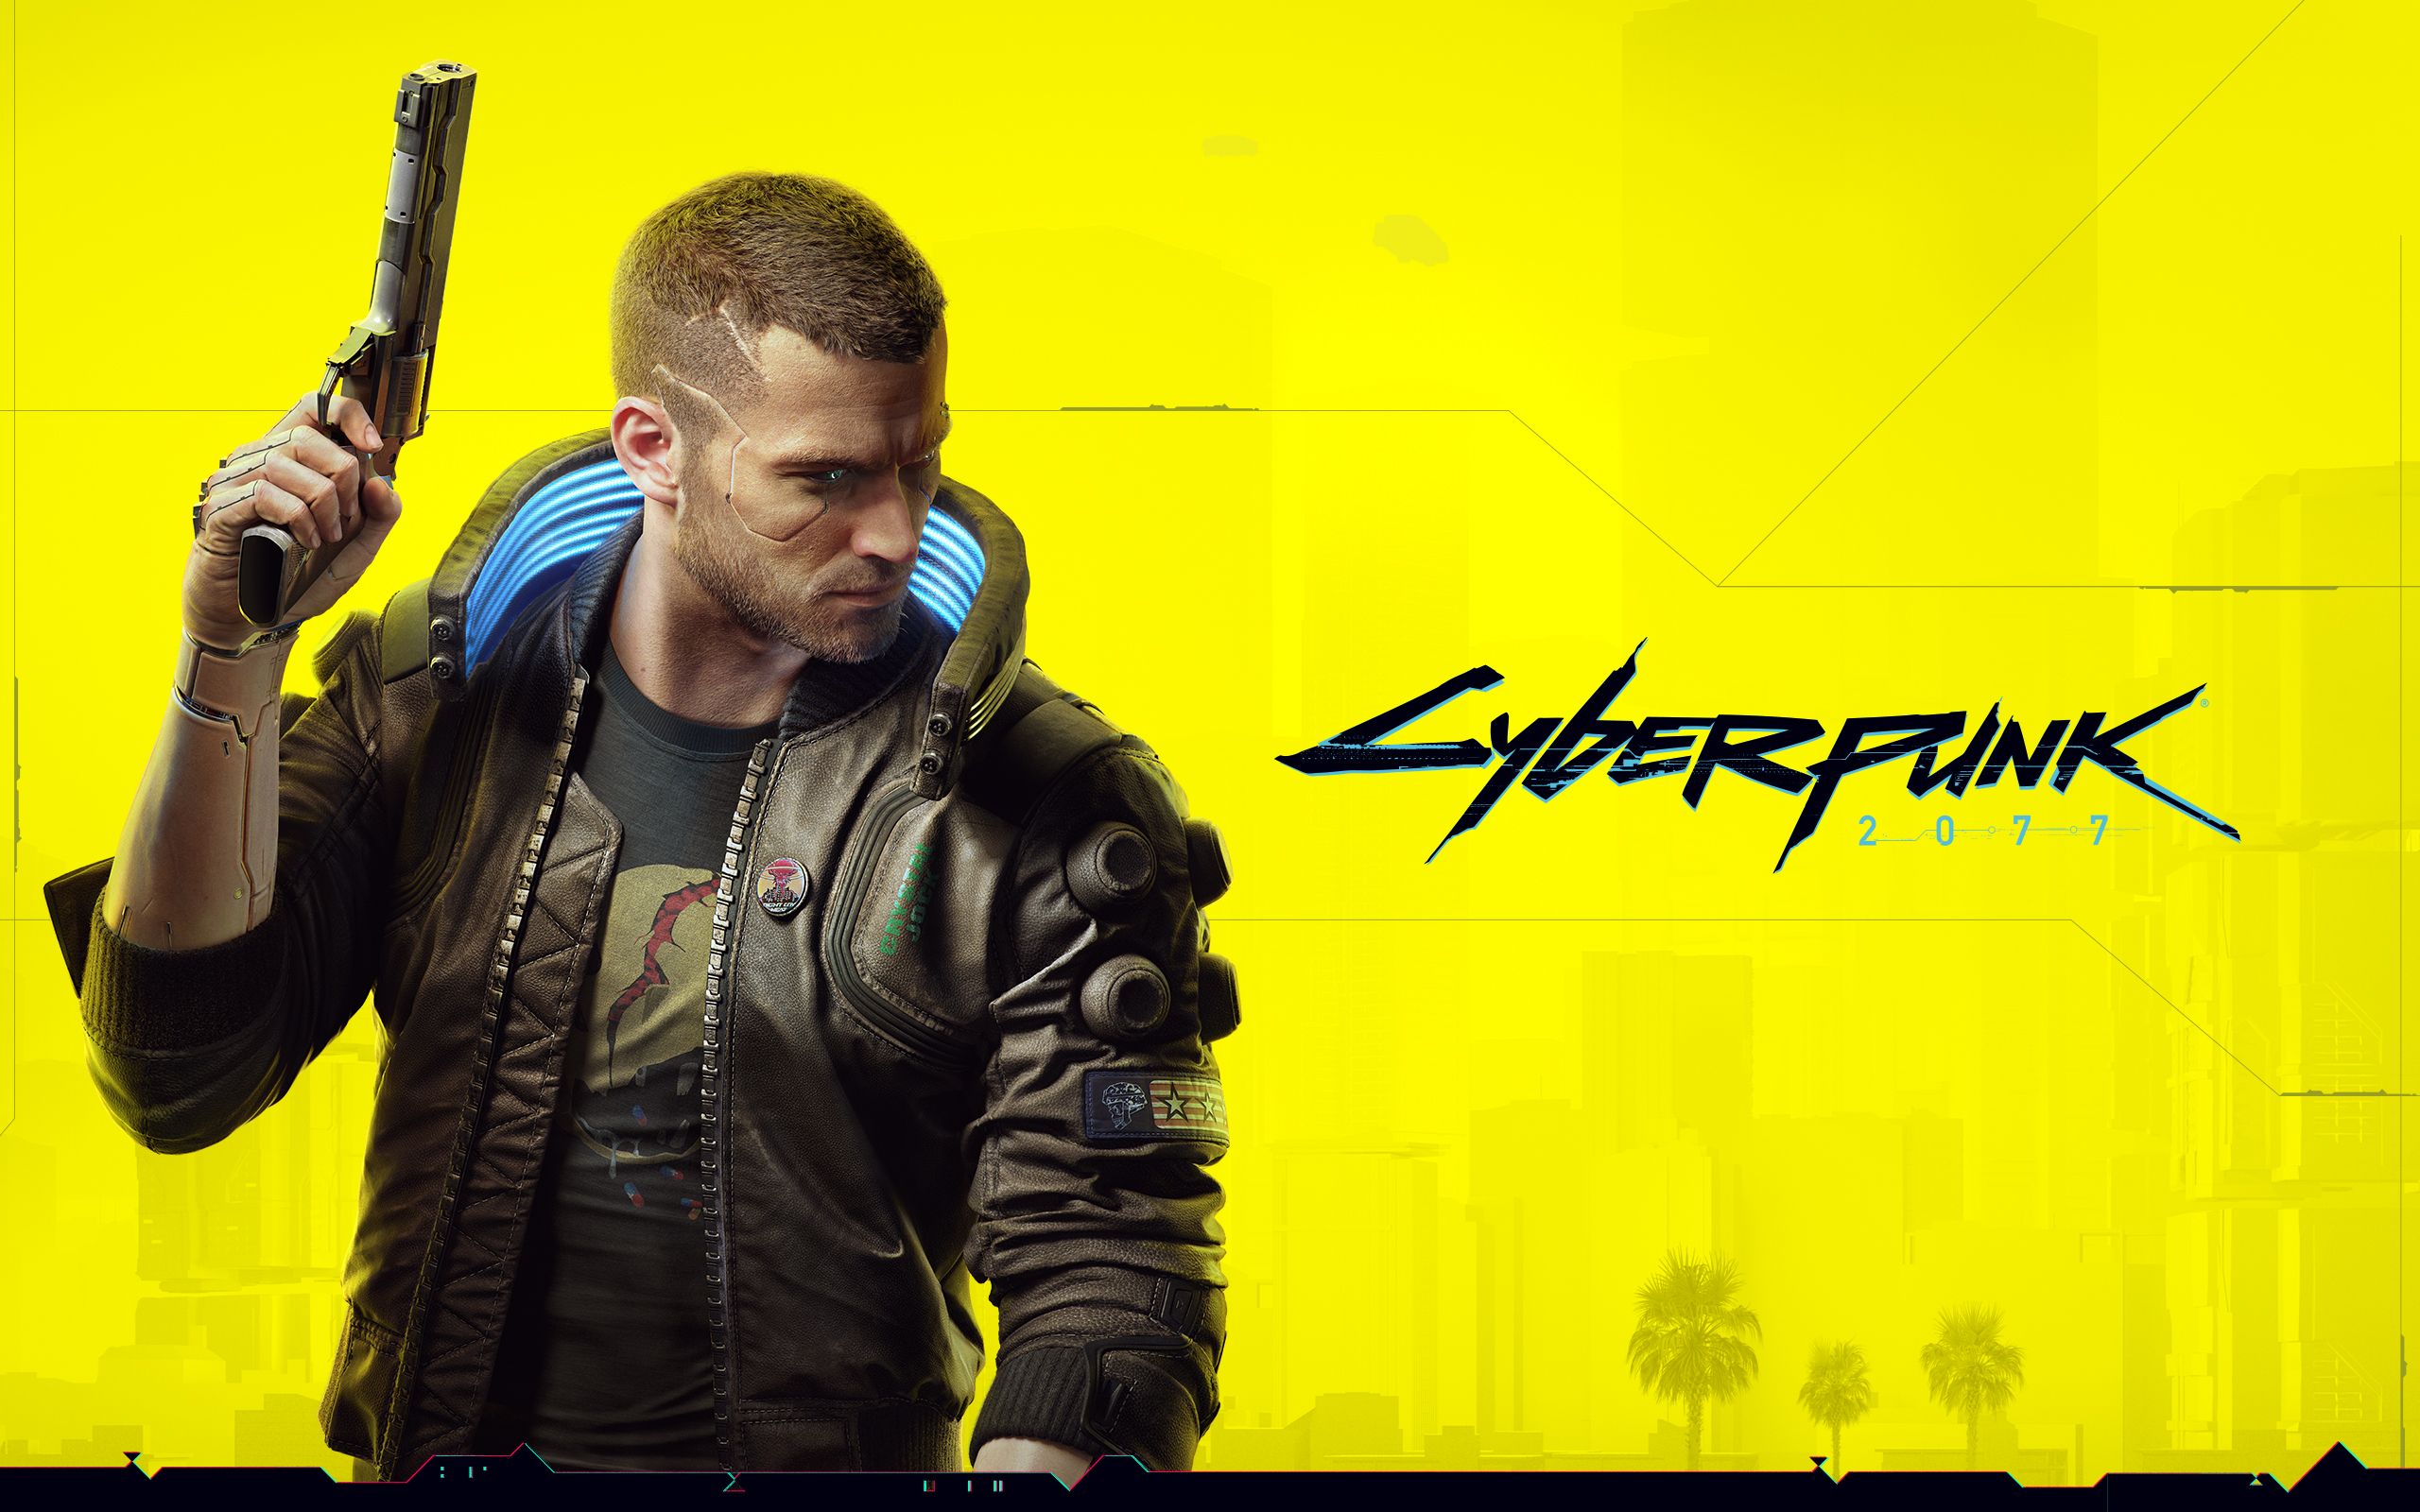 Poster computer game Cyberpunk 2077 wallpaper and image